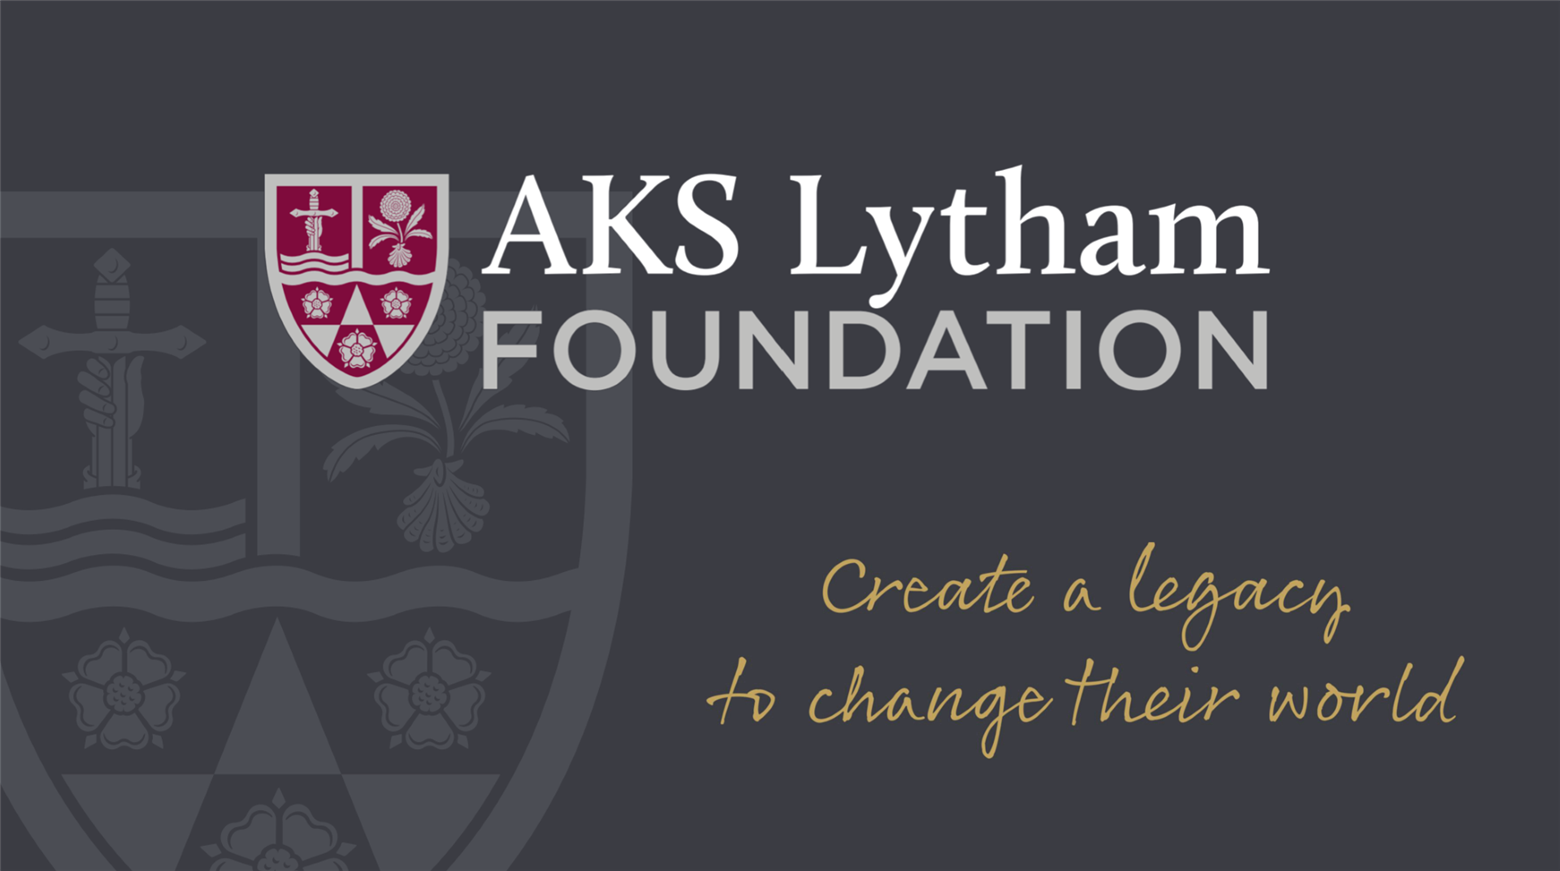 Our new charity, the AKS Lytham Foundation has now launched!